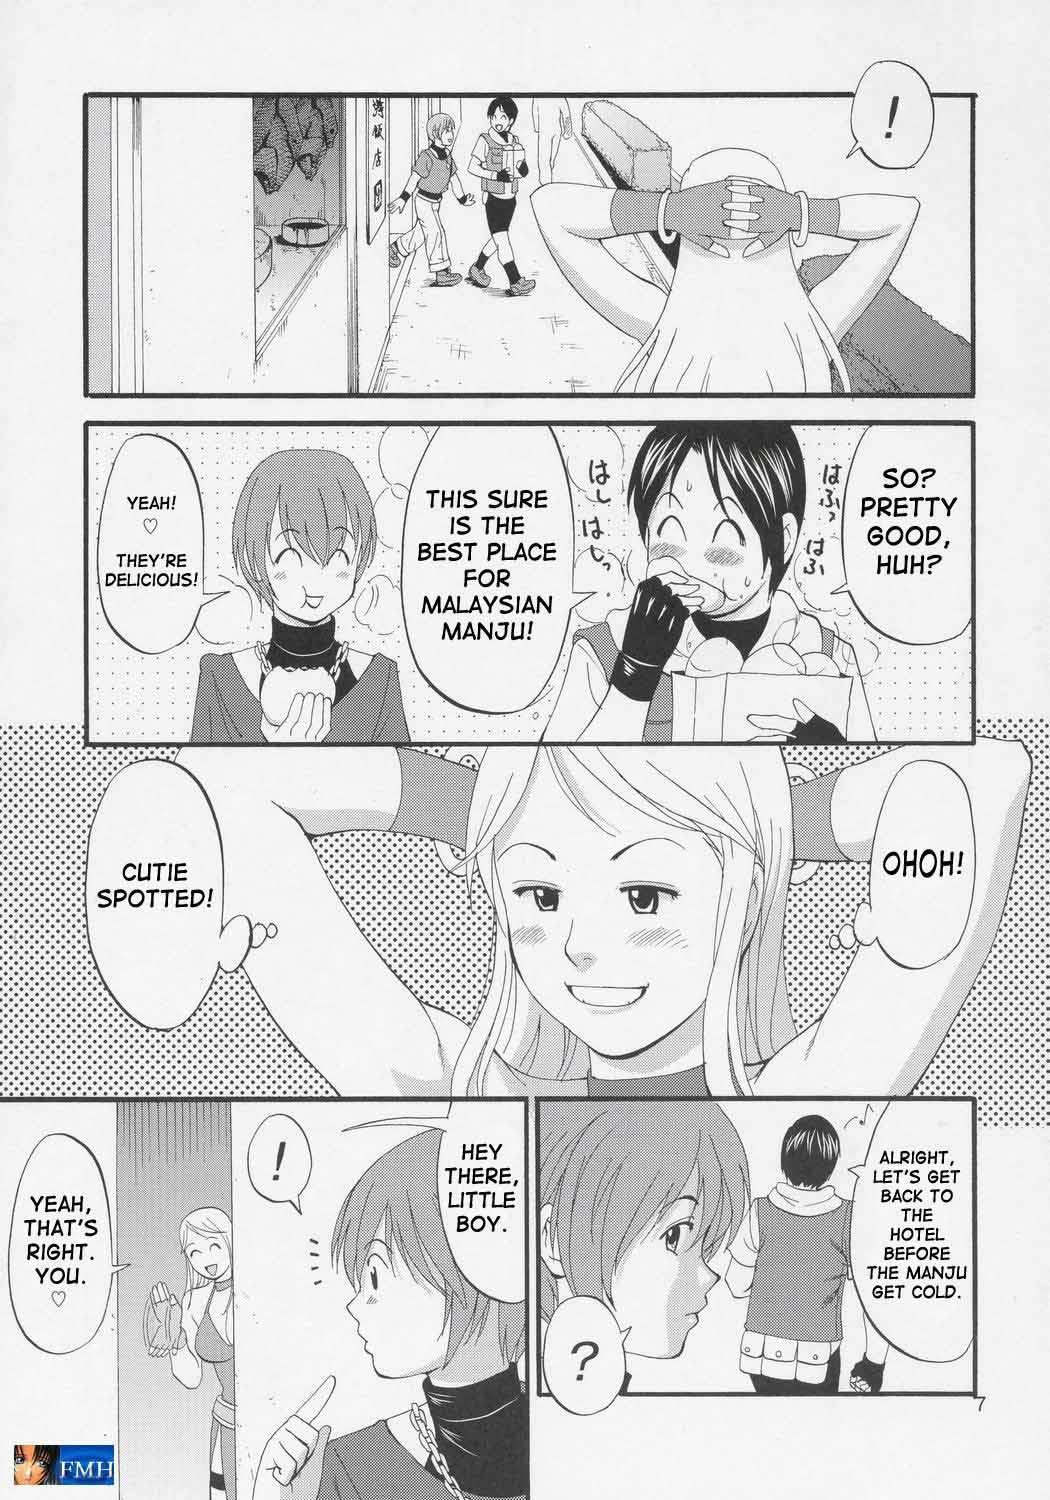 1080p Yuri & Friends Jenny Special - King of fighters Real Couple - Page 6